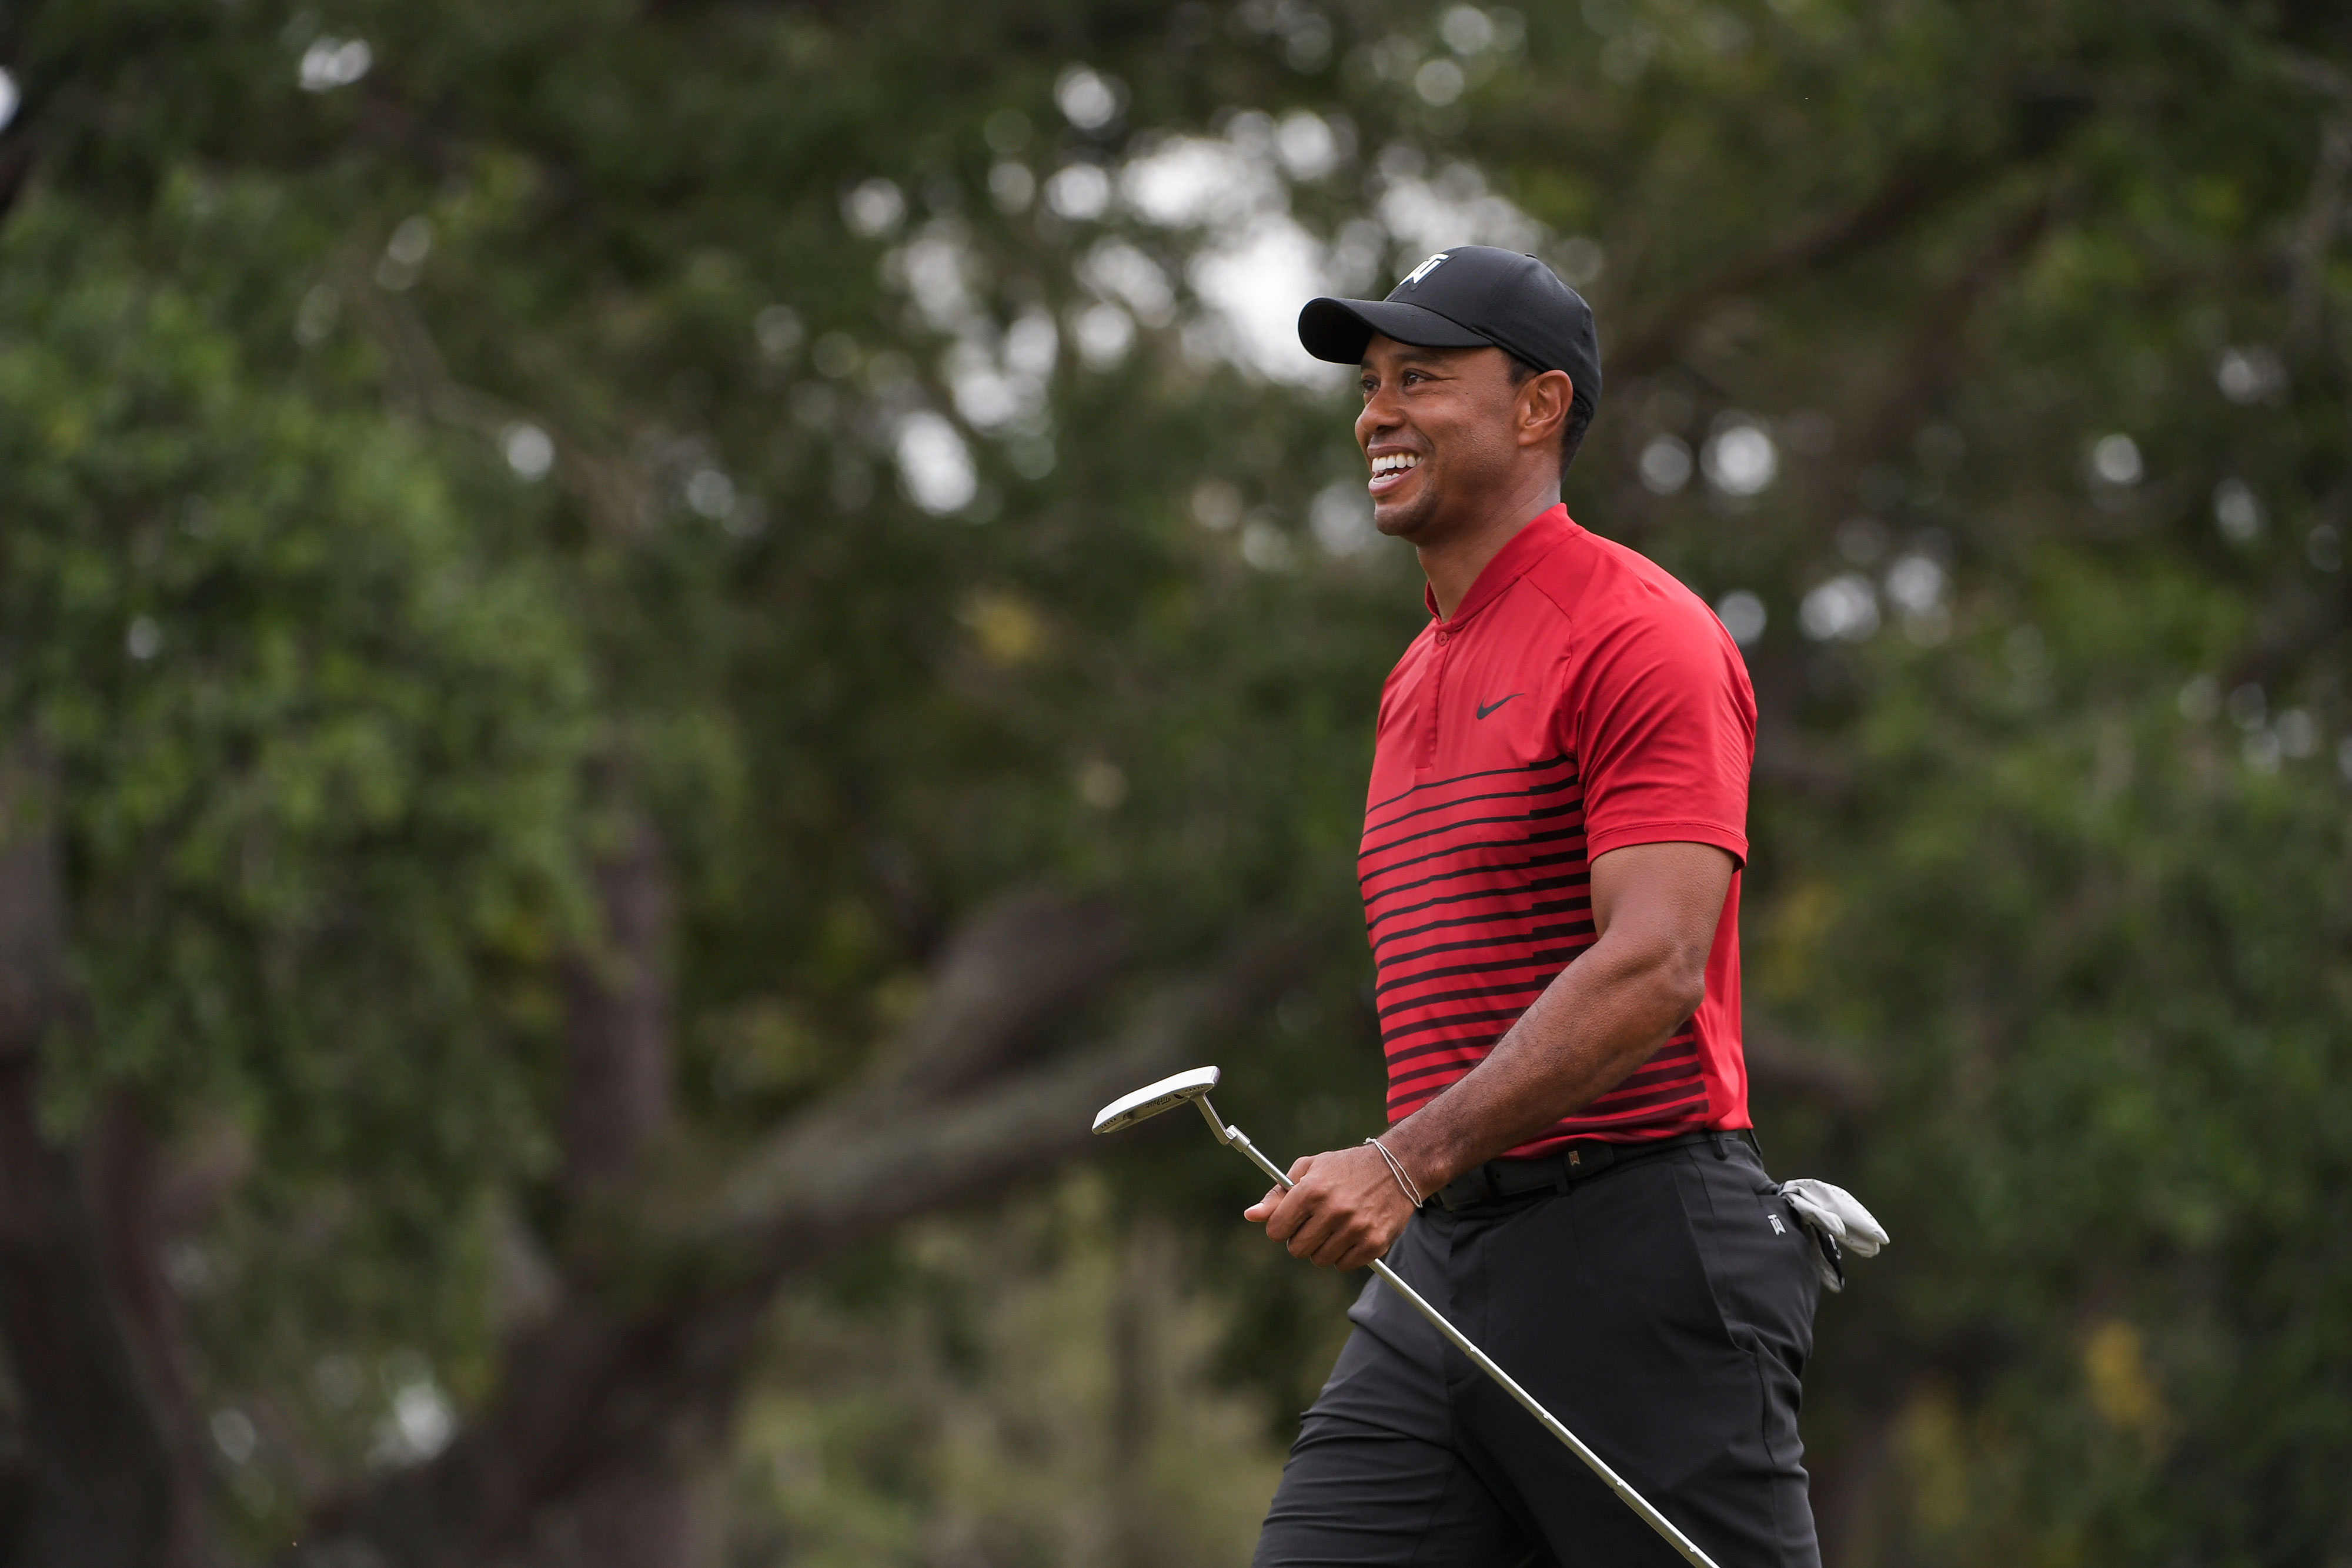 Bmw Championship 2020 Dfs Picks Why Our Expert Likes What He Sees From Tiger Woods Golf World Golf Digest